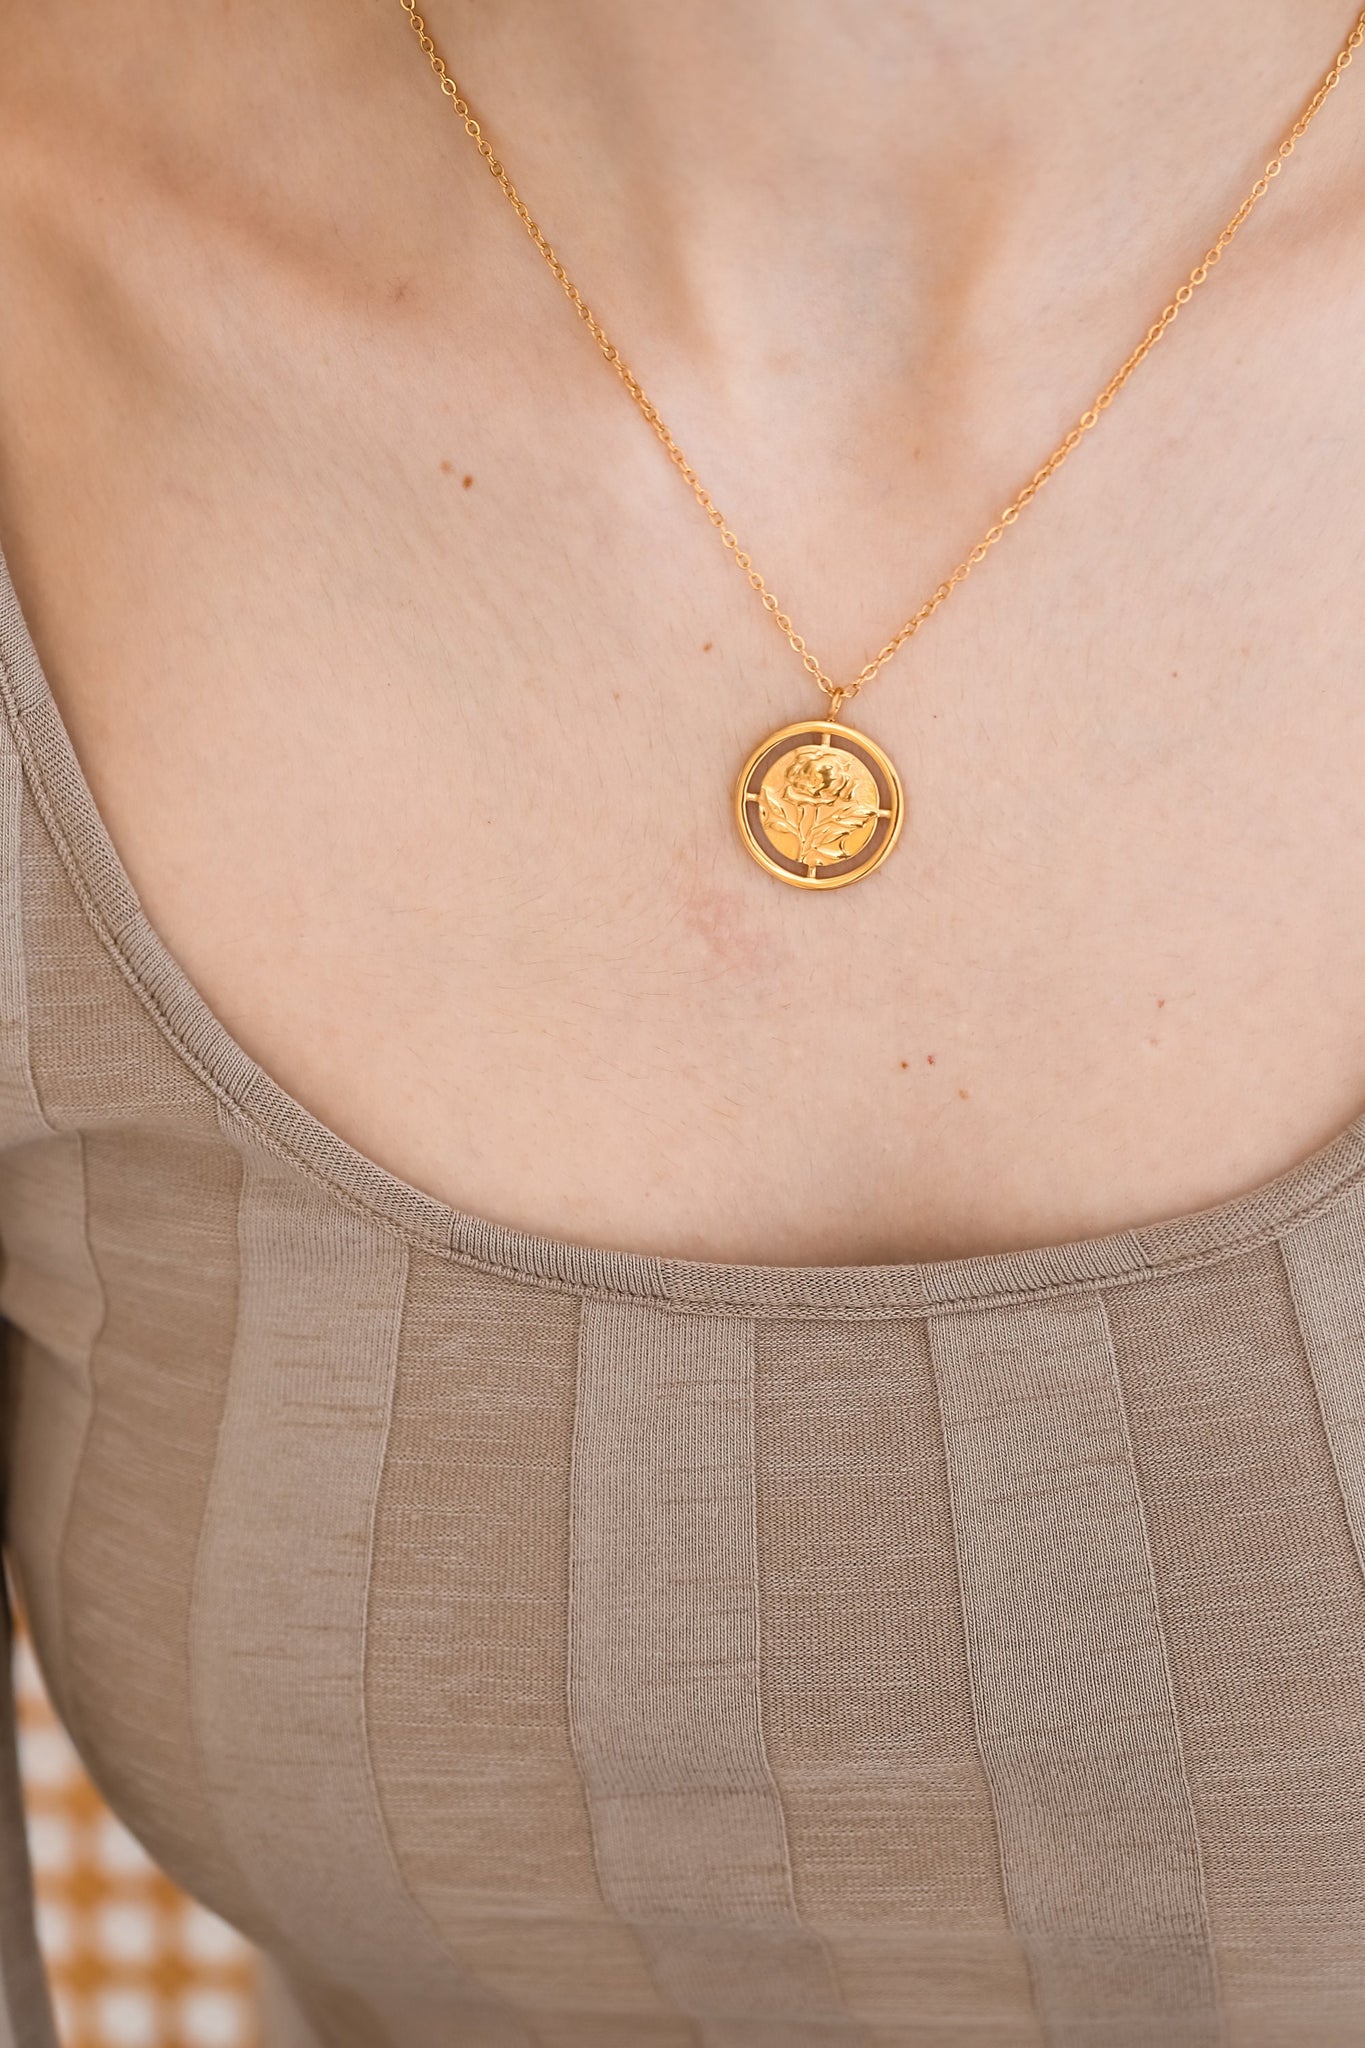 Medallion Rose Flower Necklace, 18K Gold, Mothers Day Gift, Floral Necklace, Gift For Mom, Flower Mothers Jewelry,Modern Minimalist Necklace